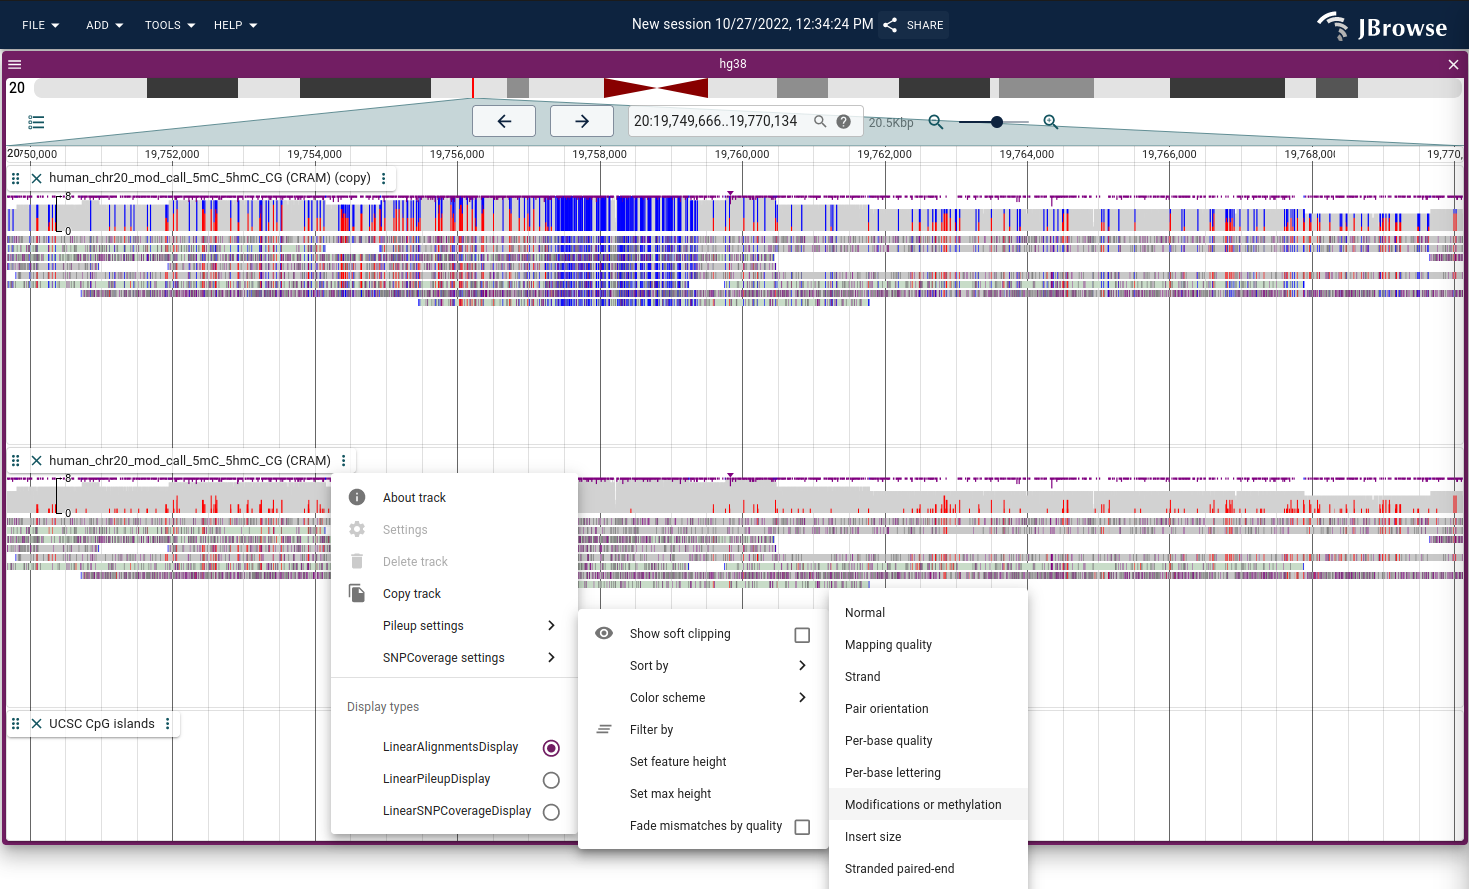 The track menu can be used to access the settings to color by modifications or methylation